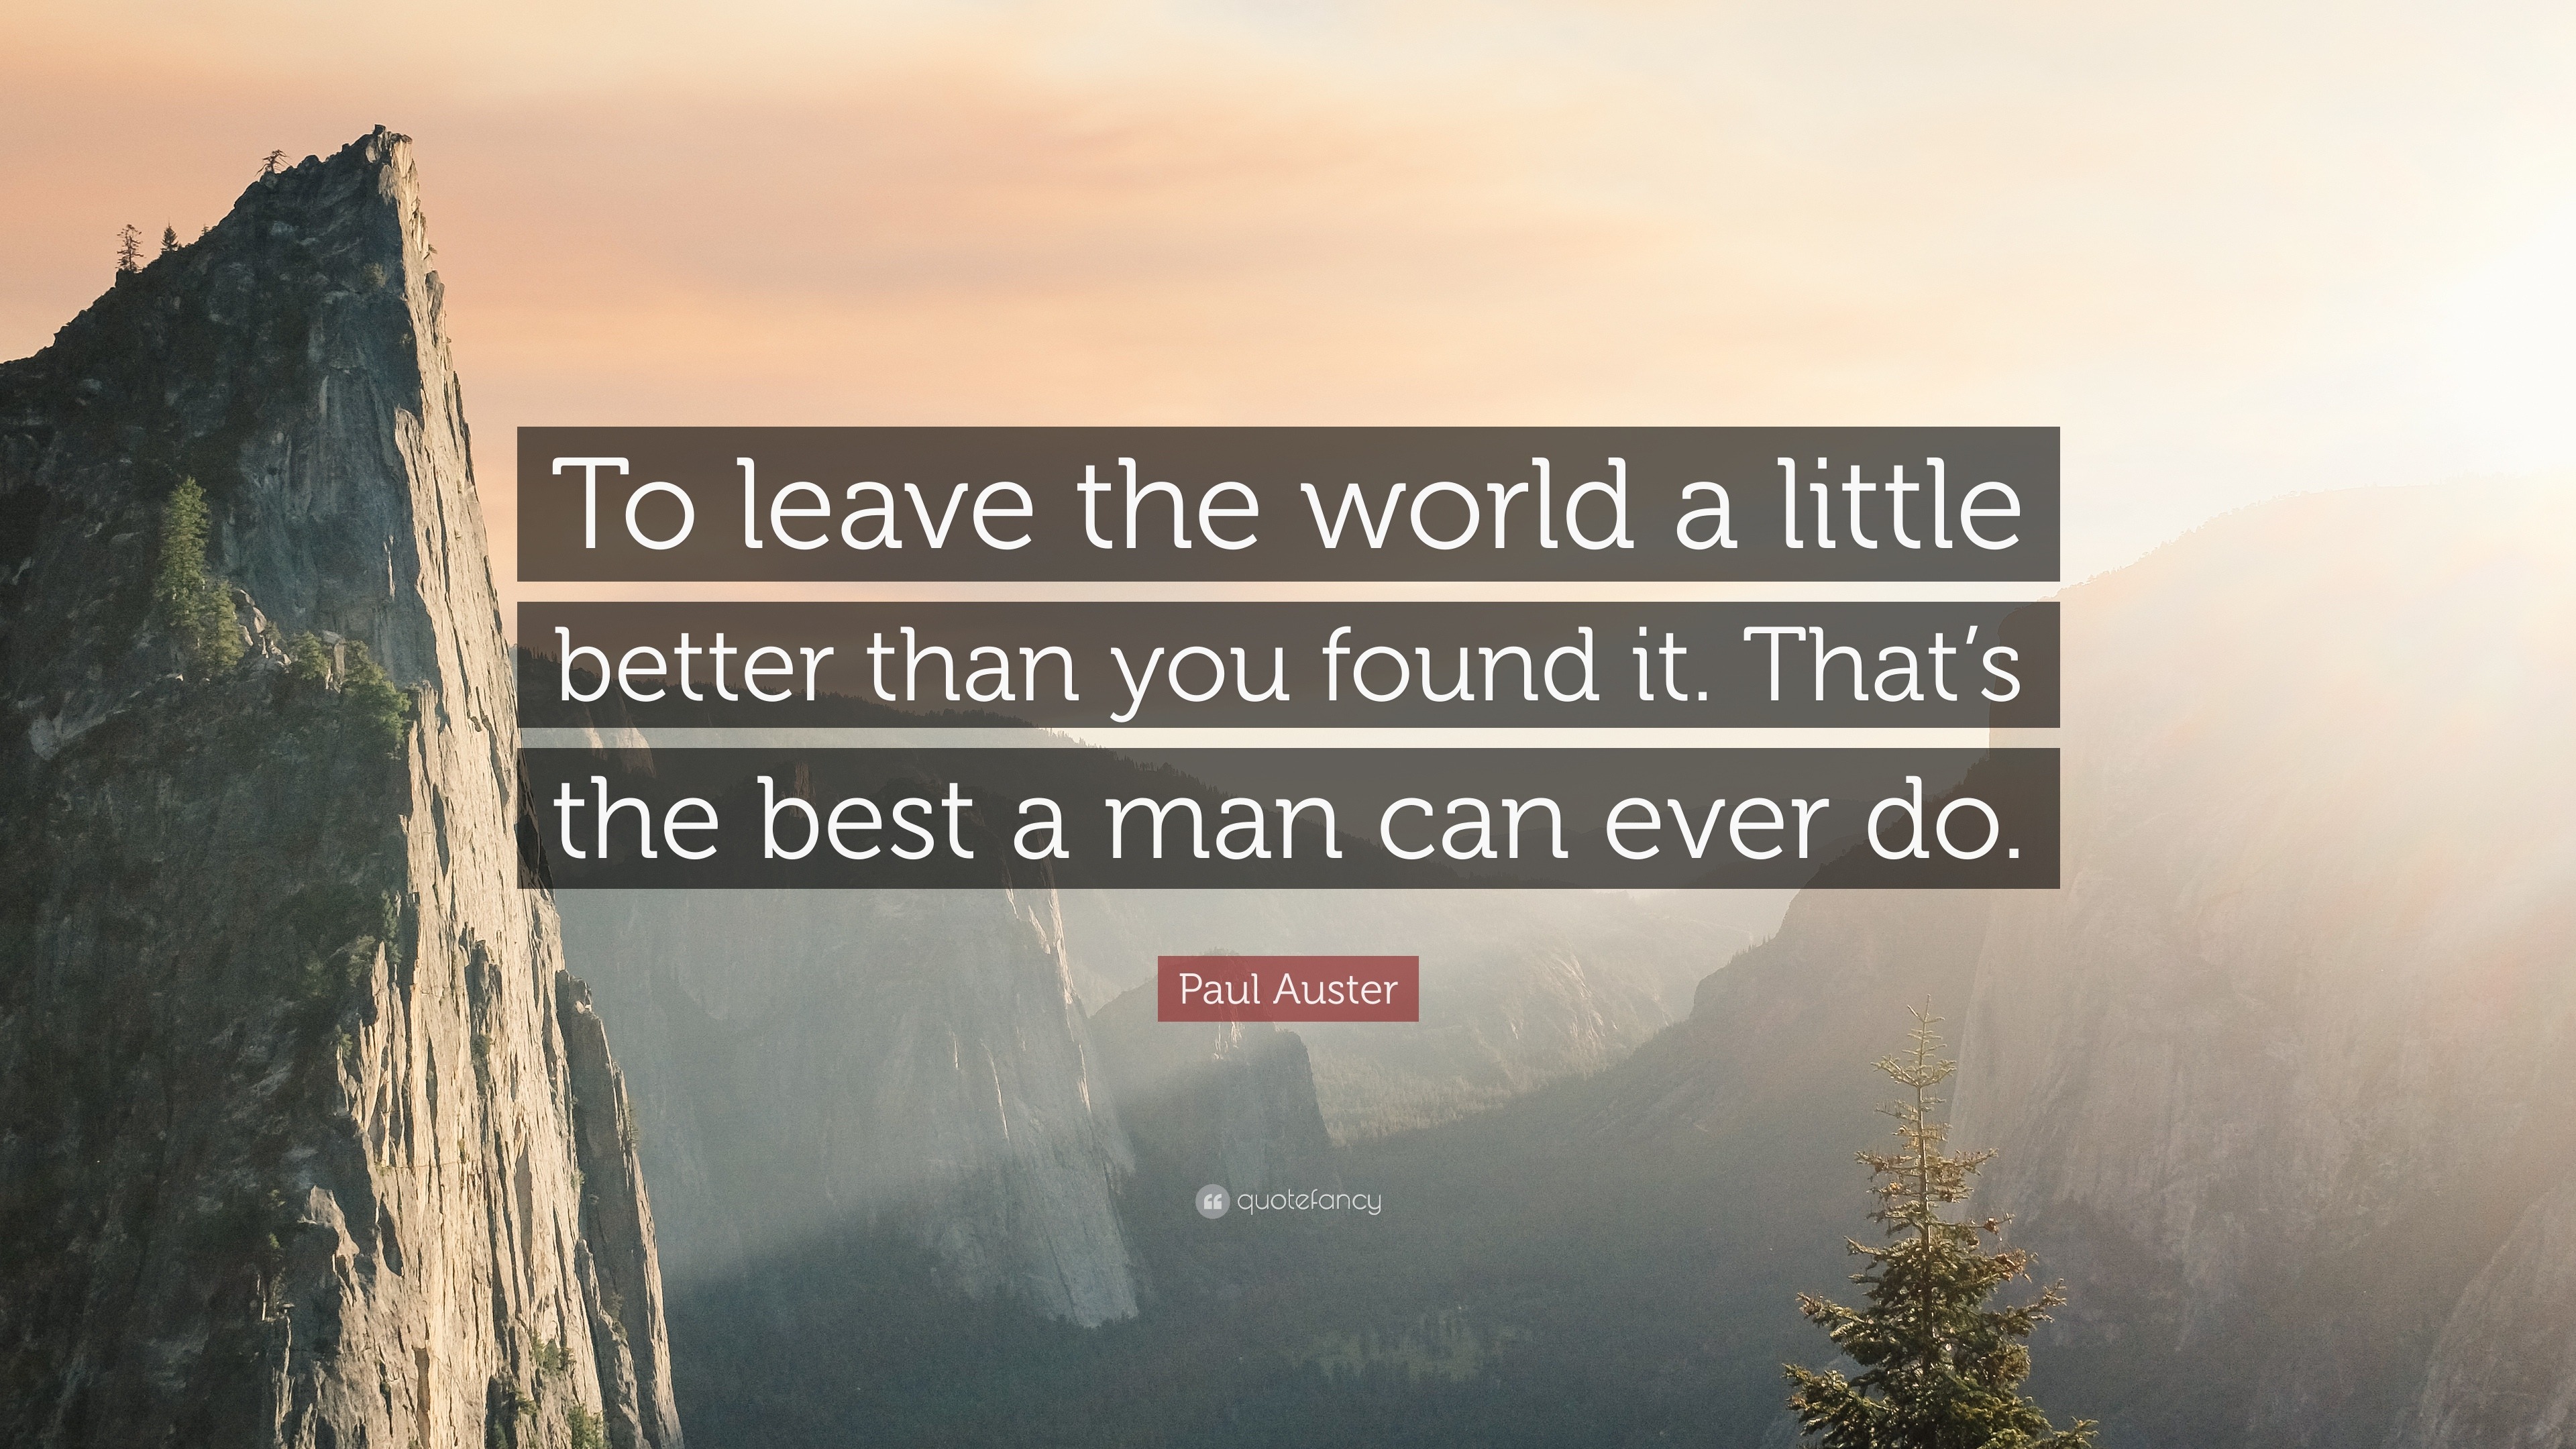 Paul Auster Quote: "To leave the world a little better than you found it. That's the best a man ...